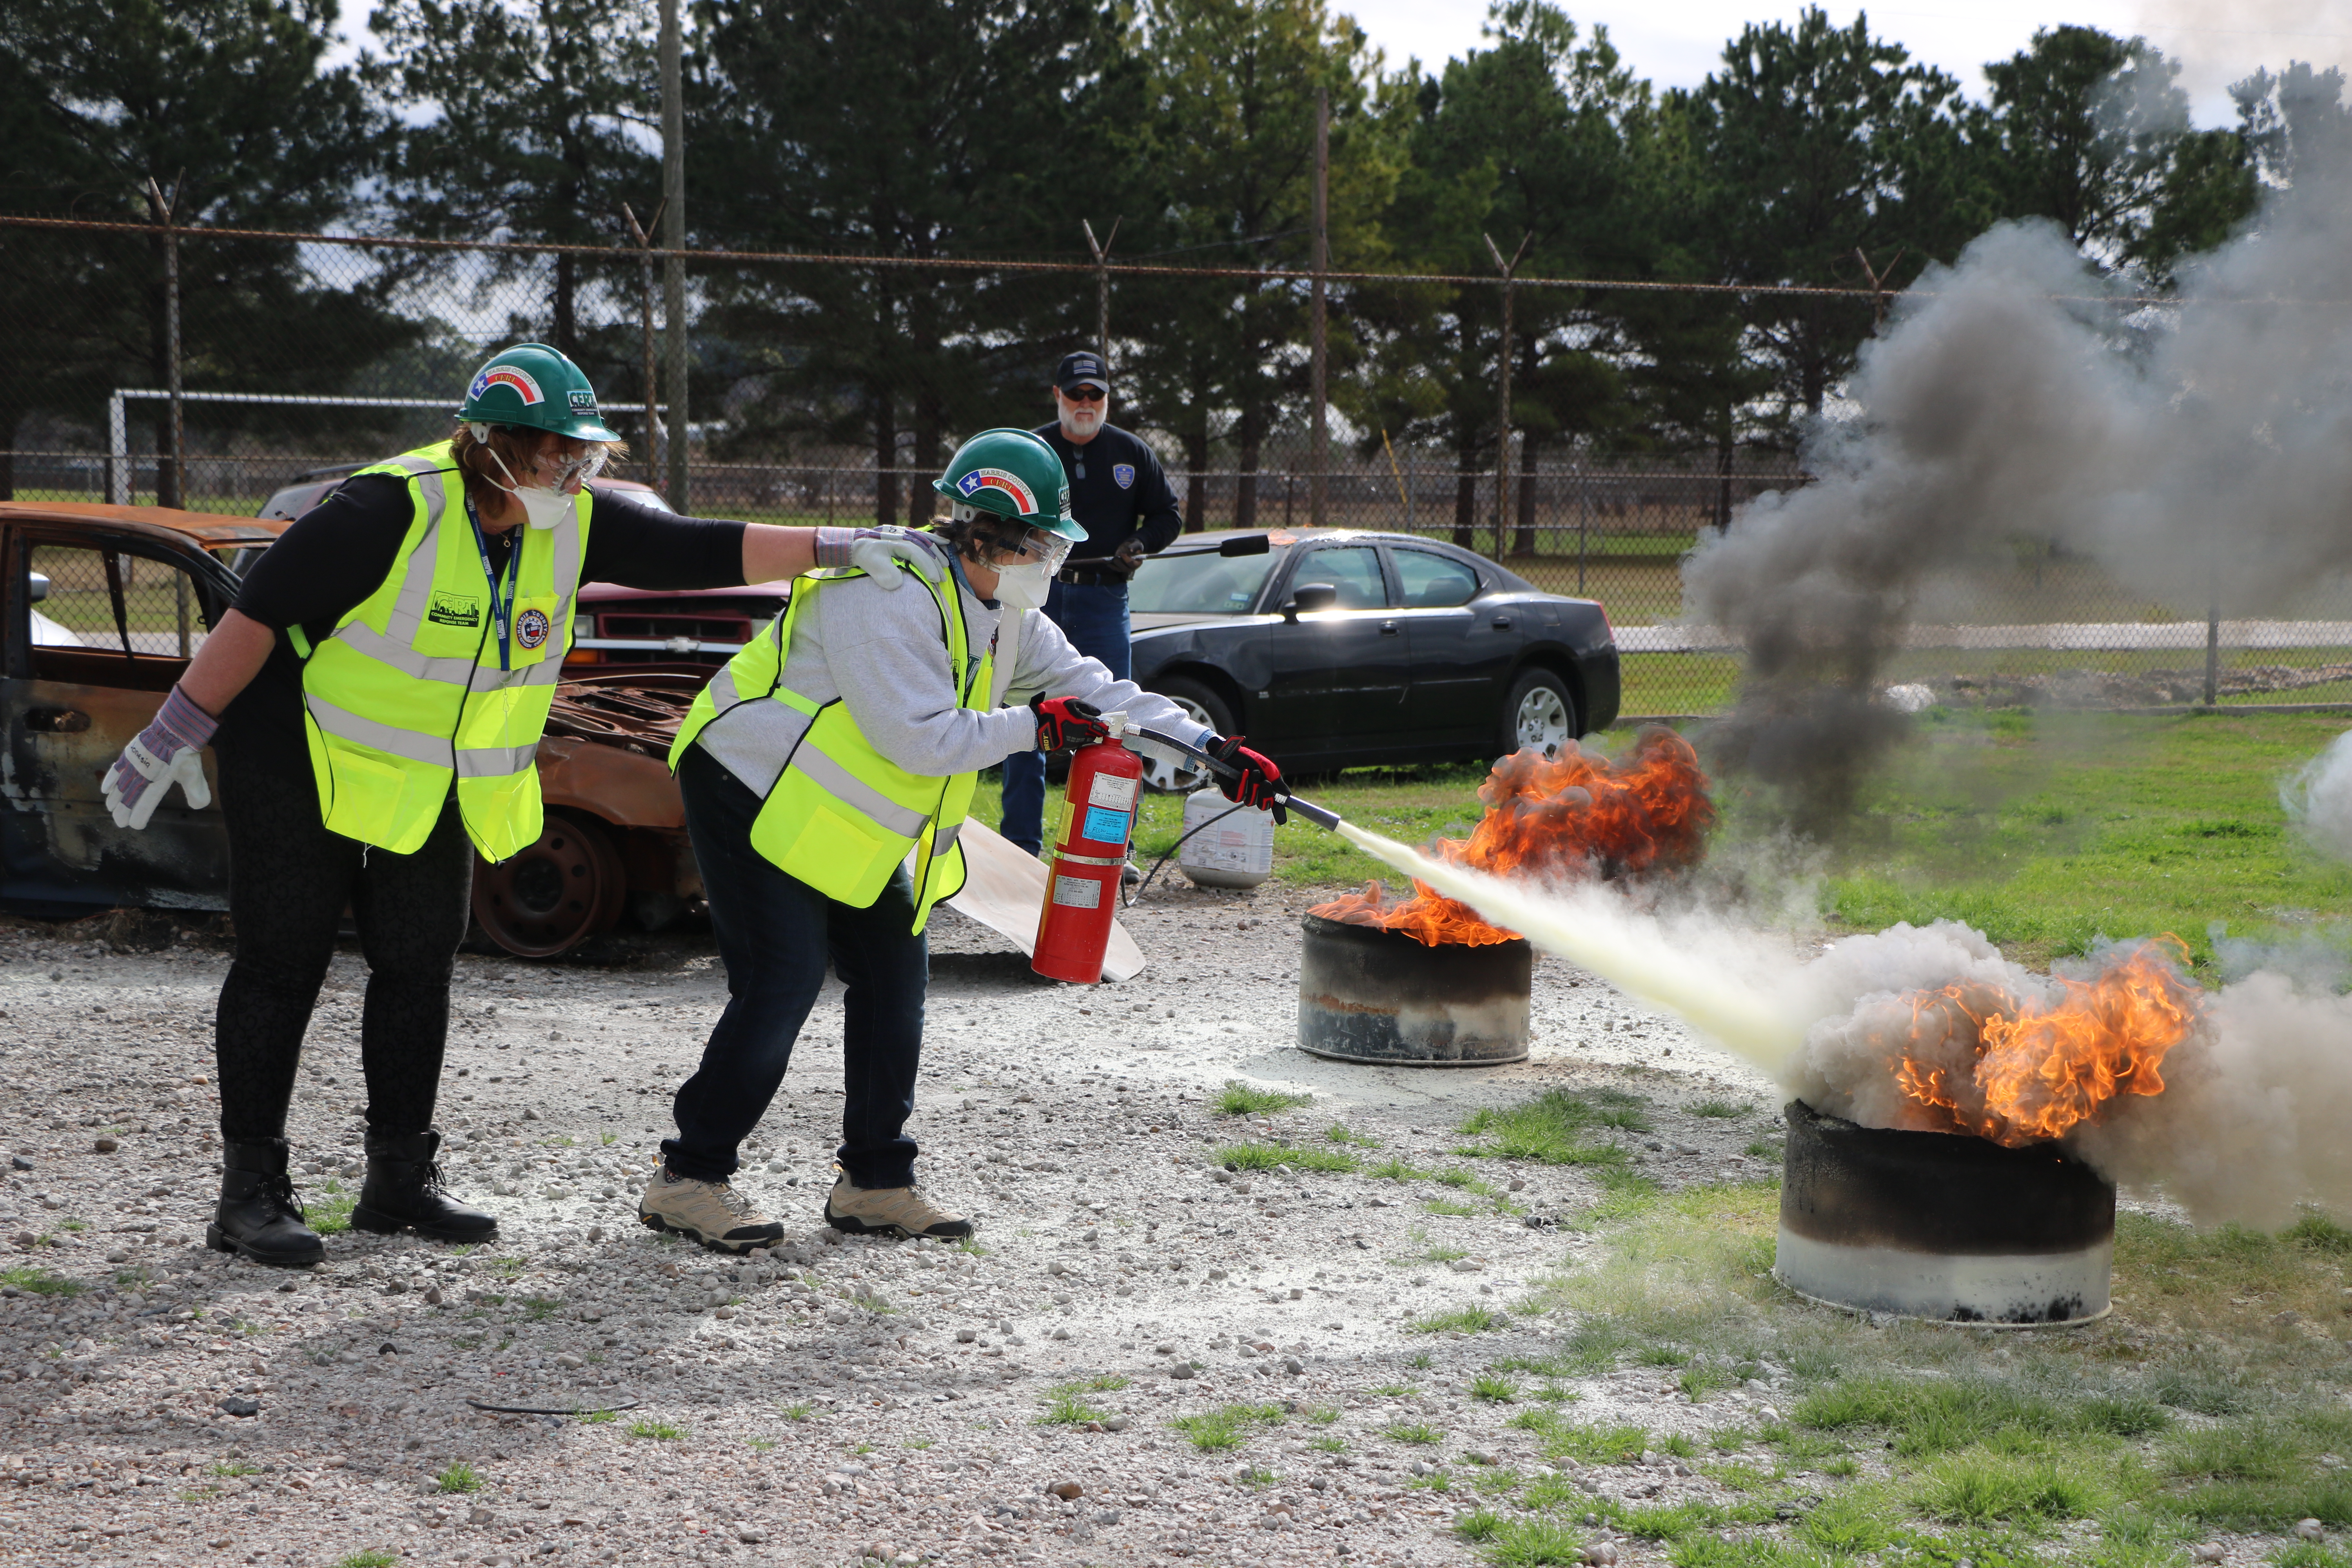 Harris County Citizens Corp to Host Free CERT Trainings, Annual CERT Rodeo